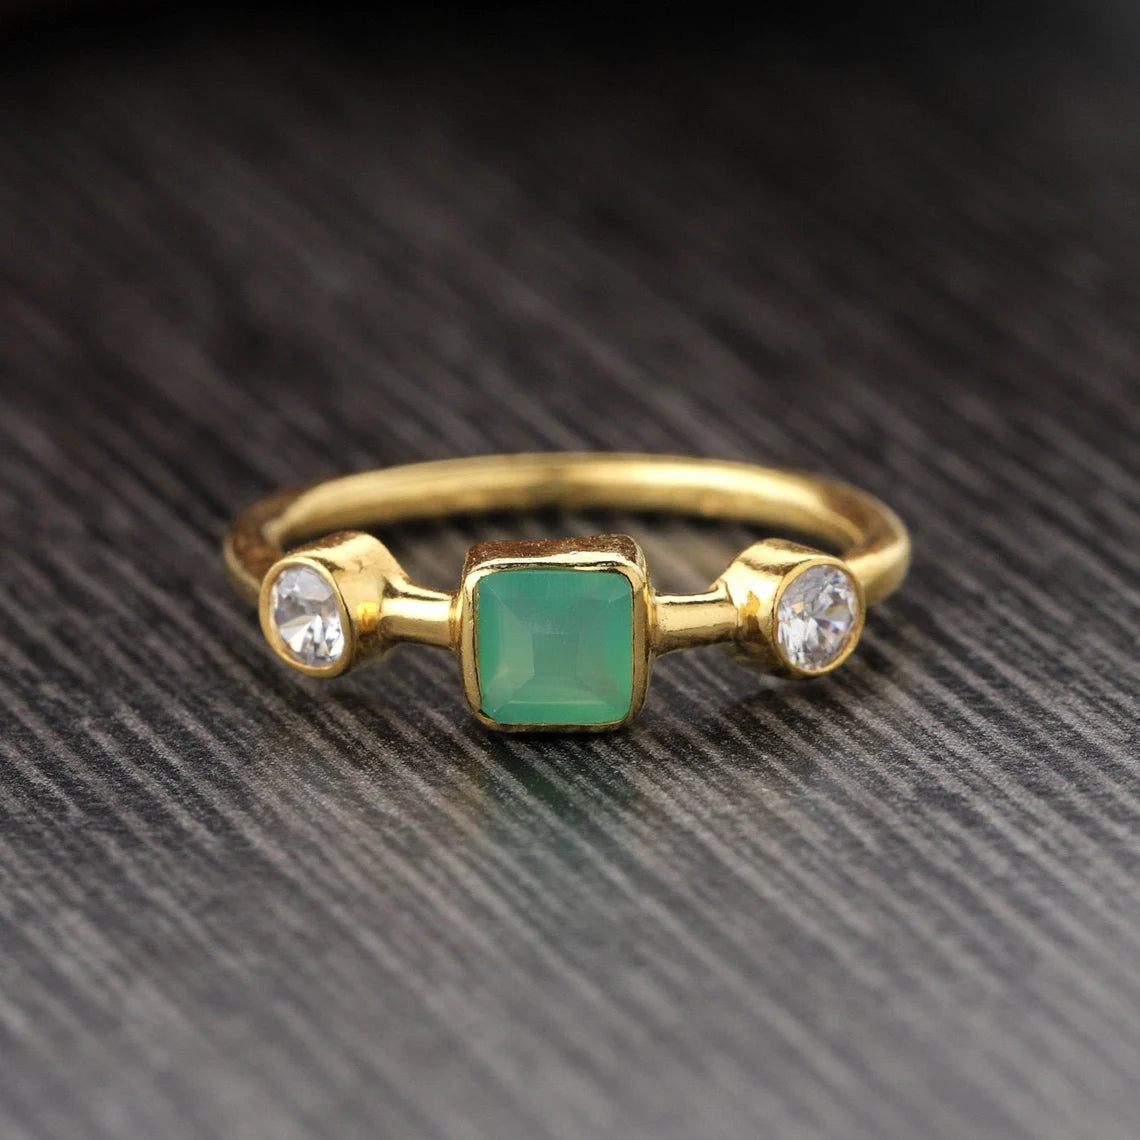 Chrysoprase Onyx Ring - Chryso Onyx Gold Ring - CZ Sterling Silver Ring - Chryso Onyx Stackable Ring, Stacking Ring, Fancy Ring